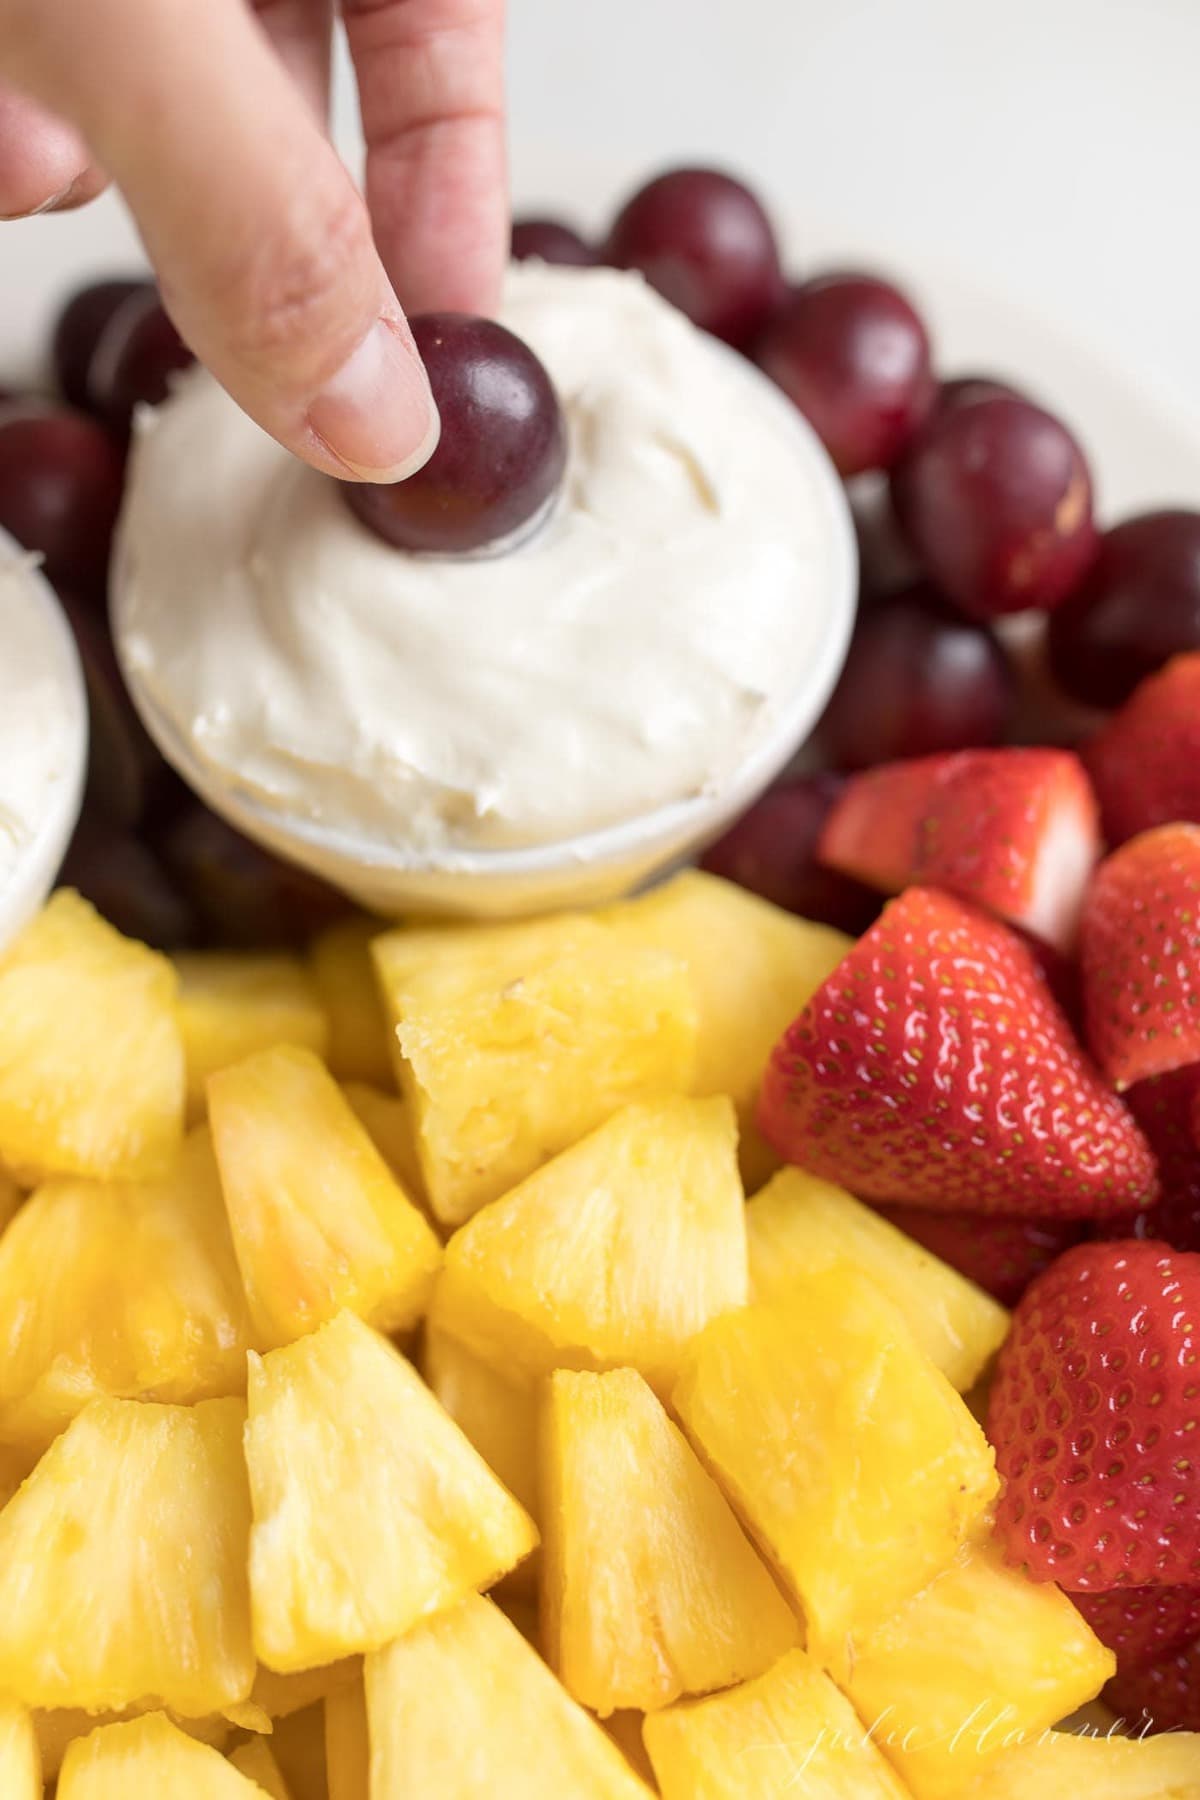 A hand dipping into a bowl full of cream cheese fruit dip